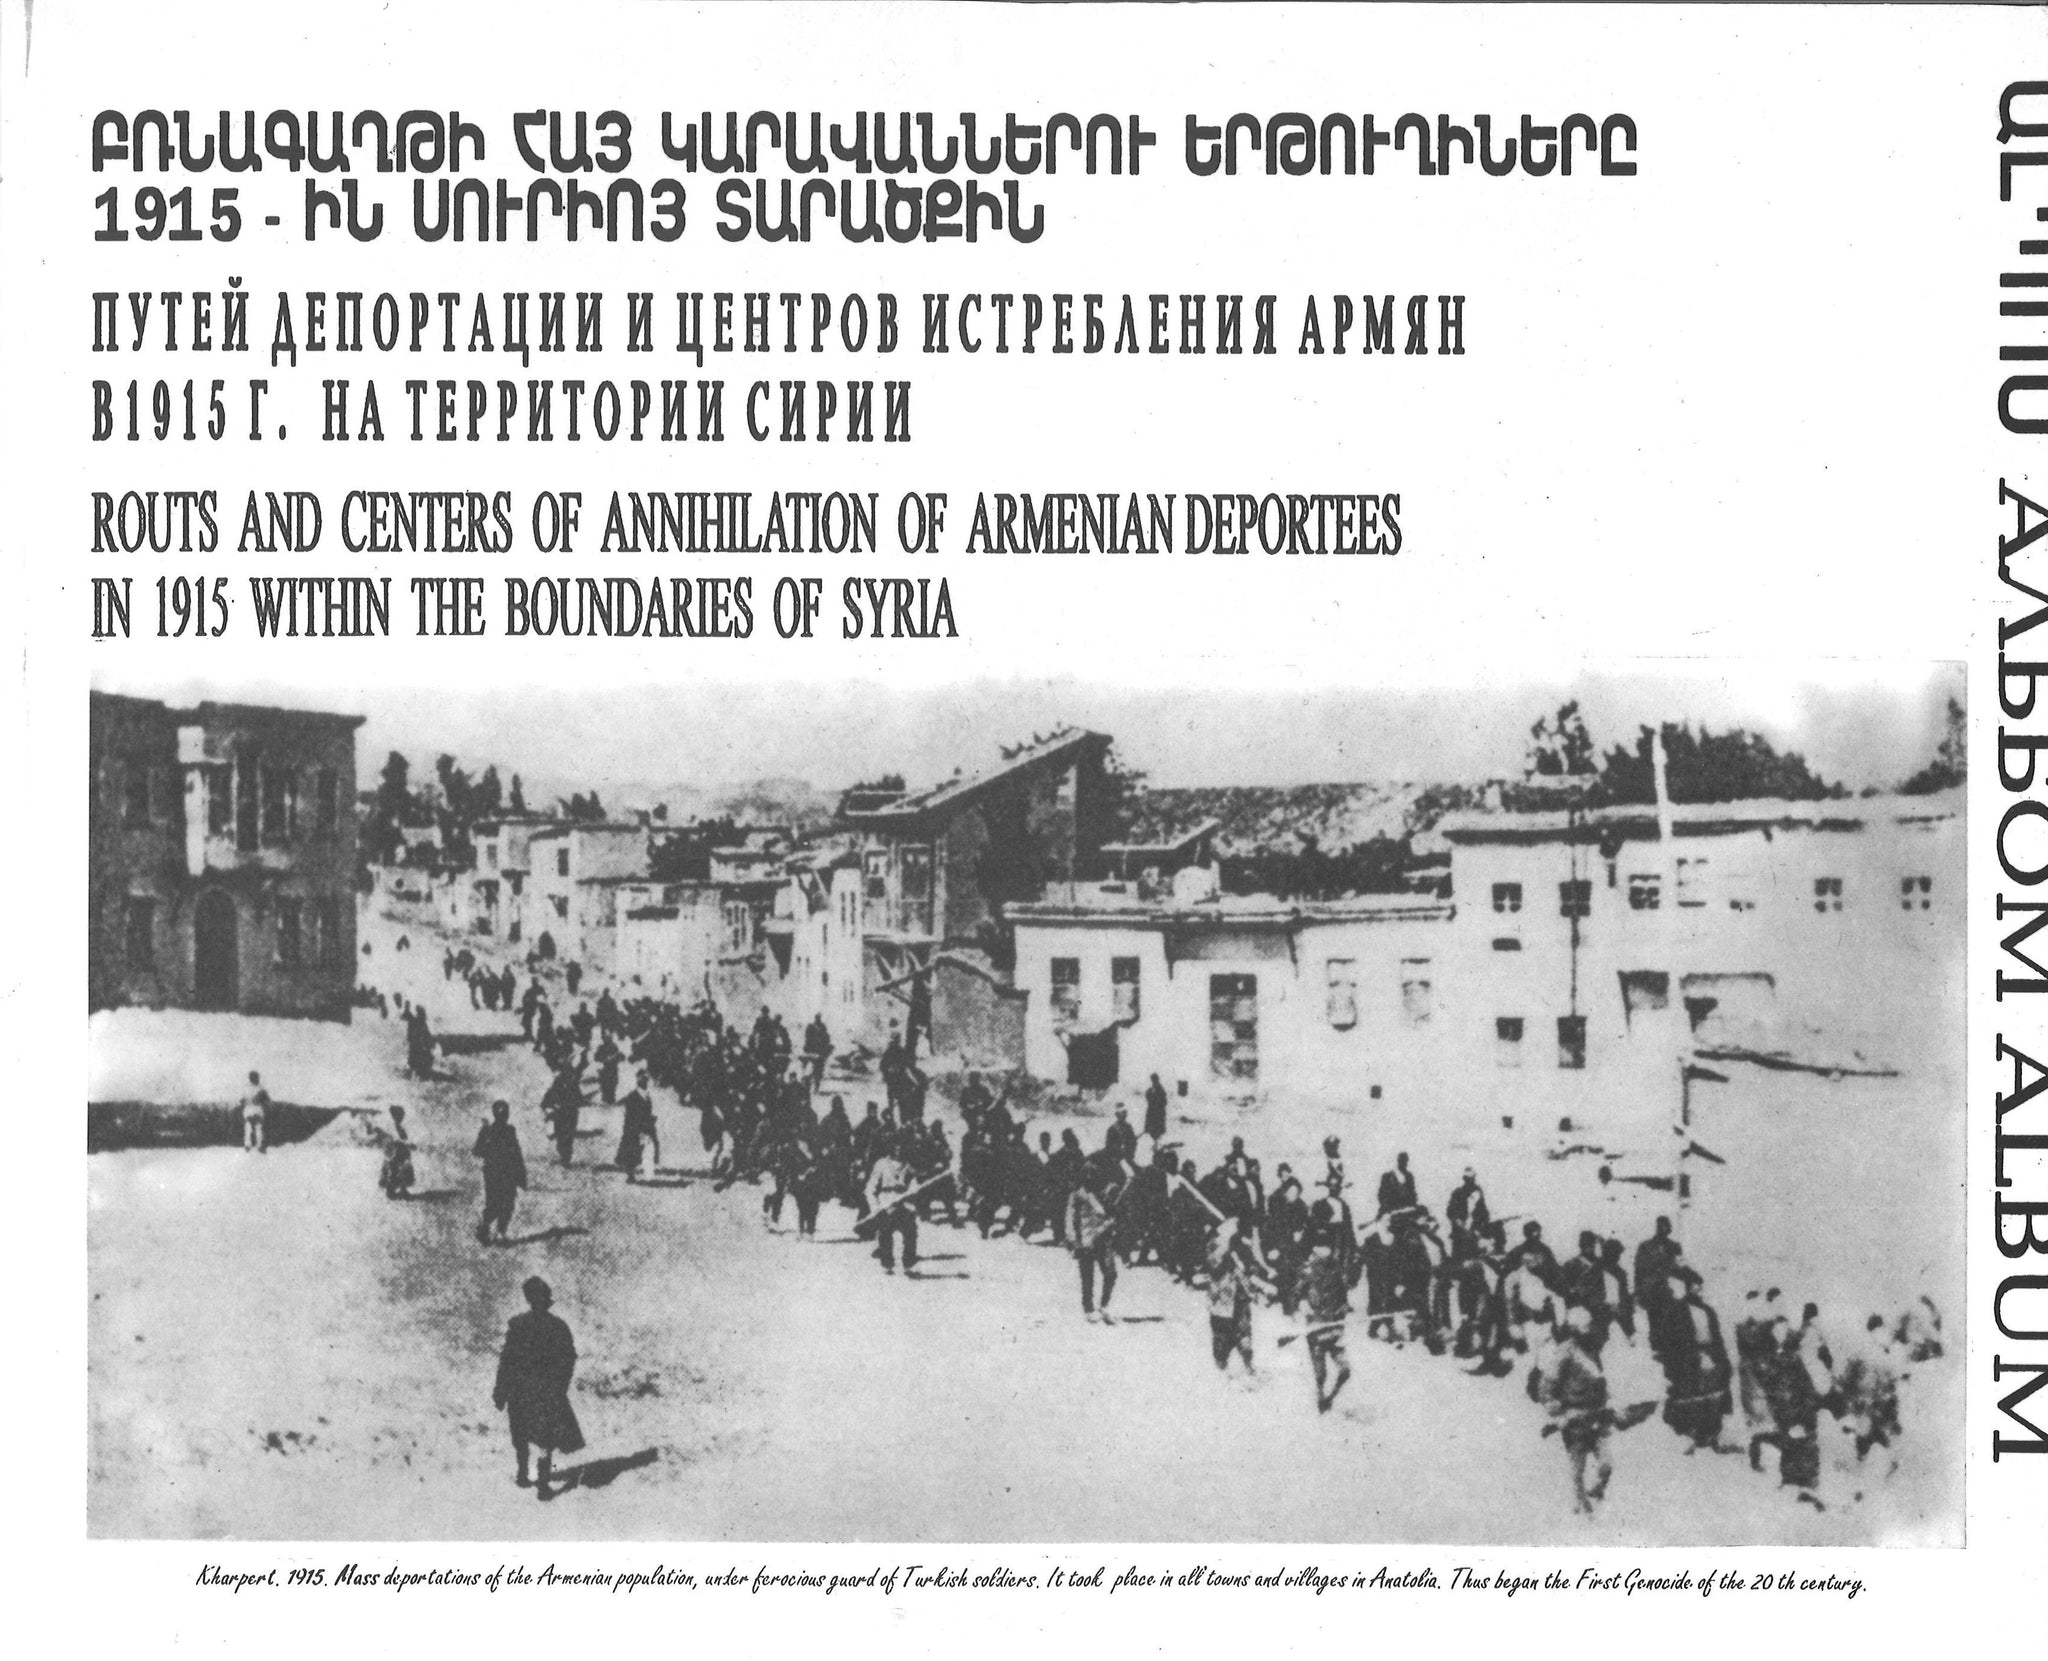 ROUTS AND CENTERS OF ANNIHILATION OF ARMENIA DEPORTEES IN 1915 WITHIN THE BOUNDARIES OF SYRIA - A Pictorial Record